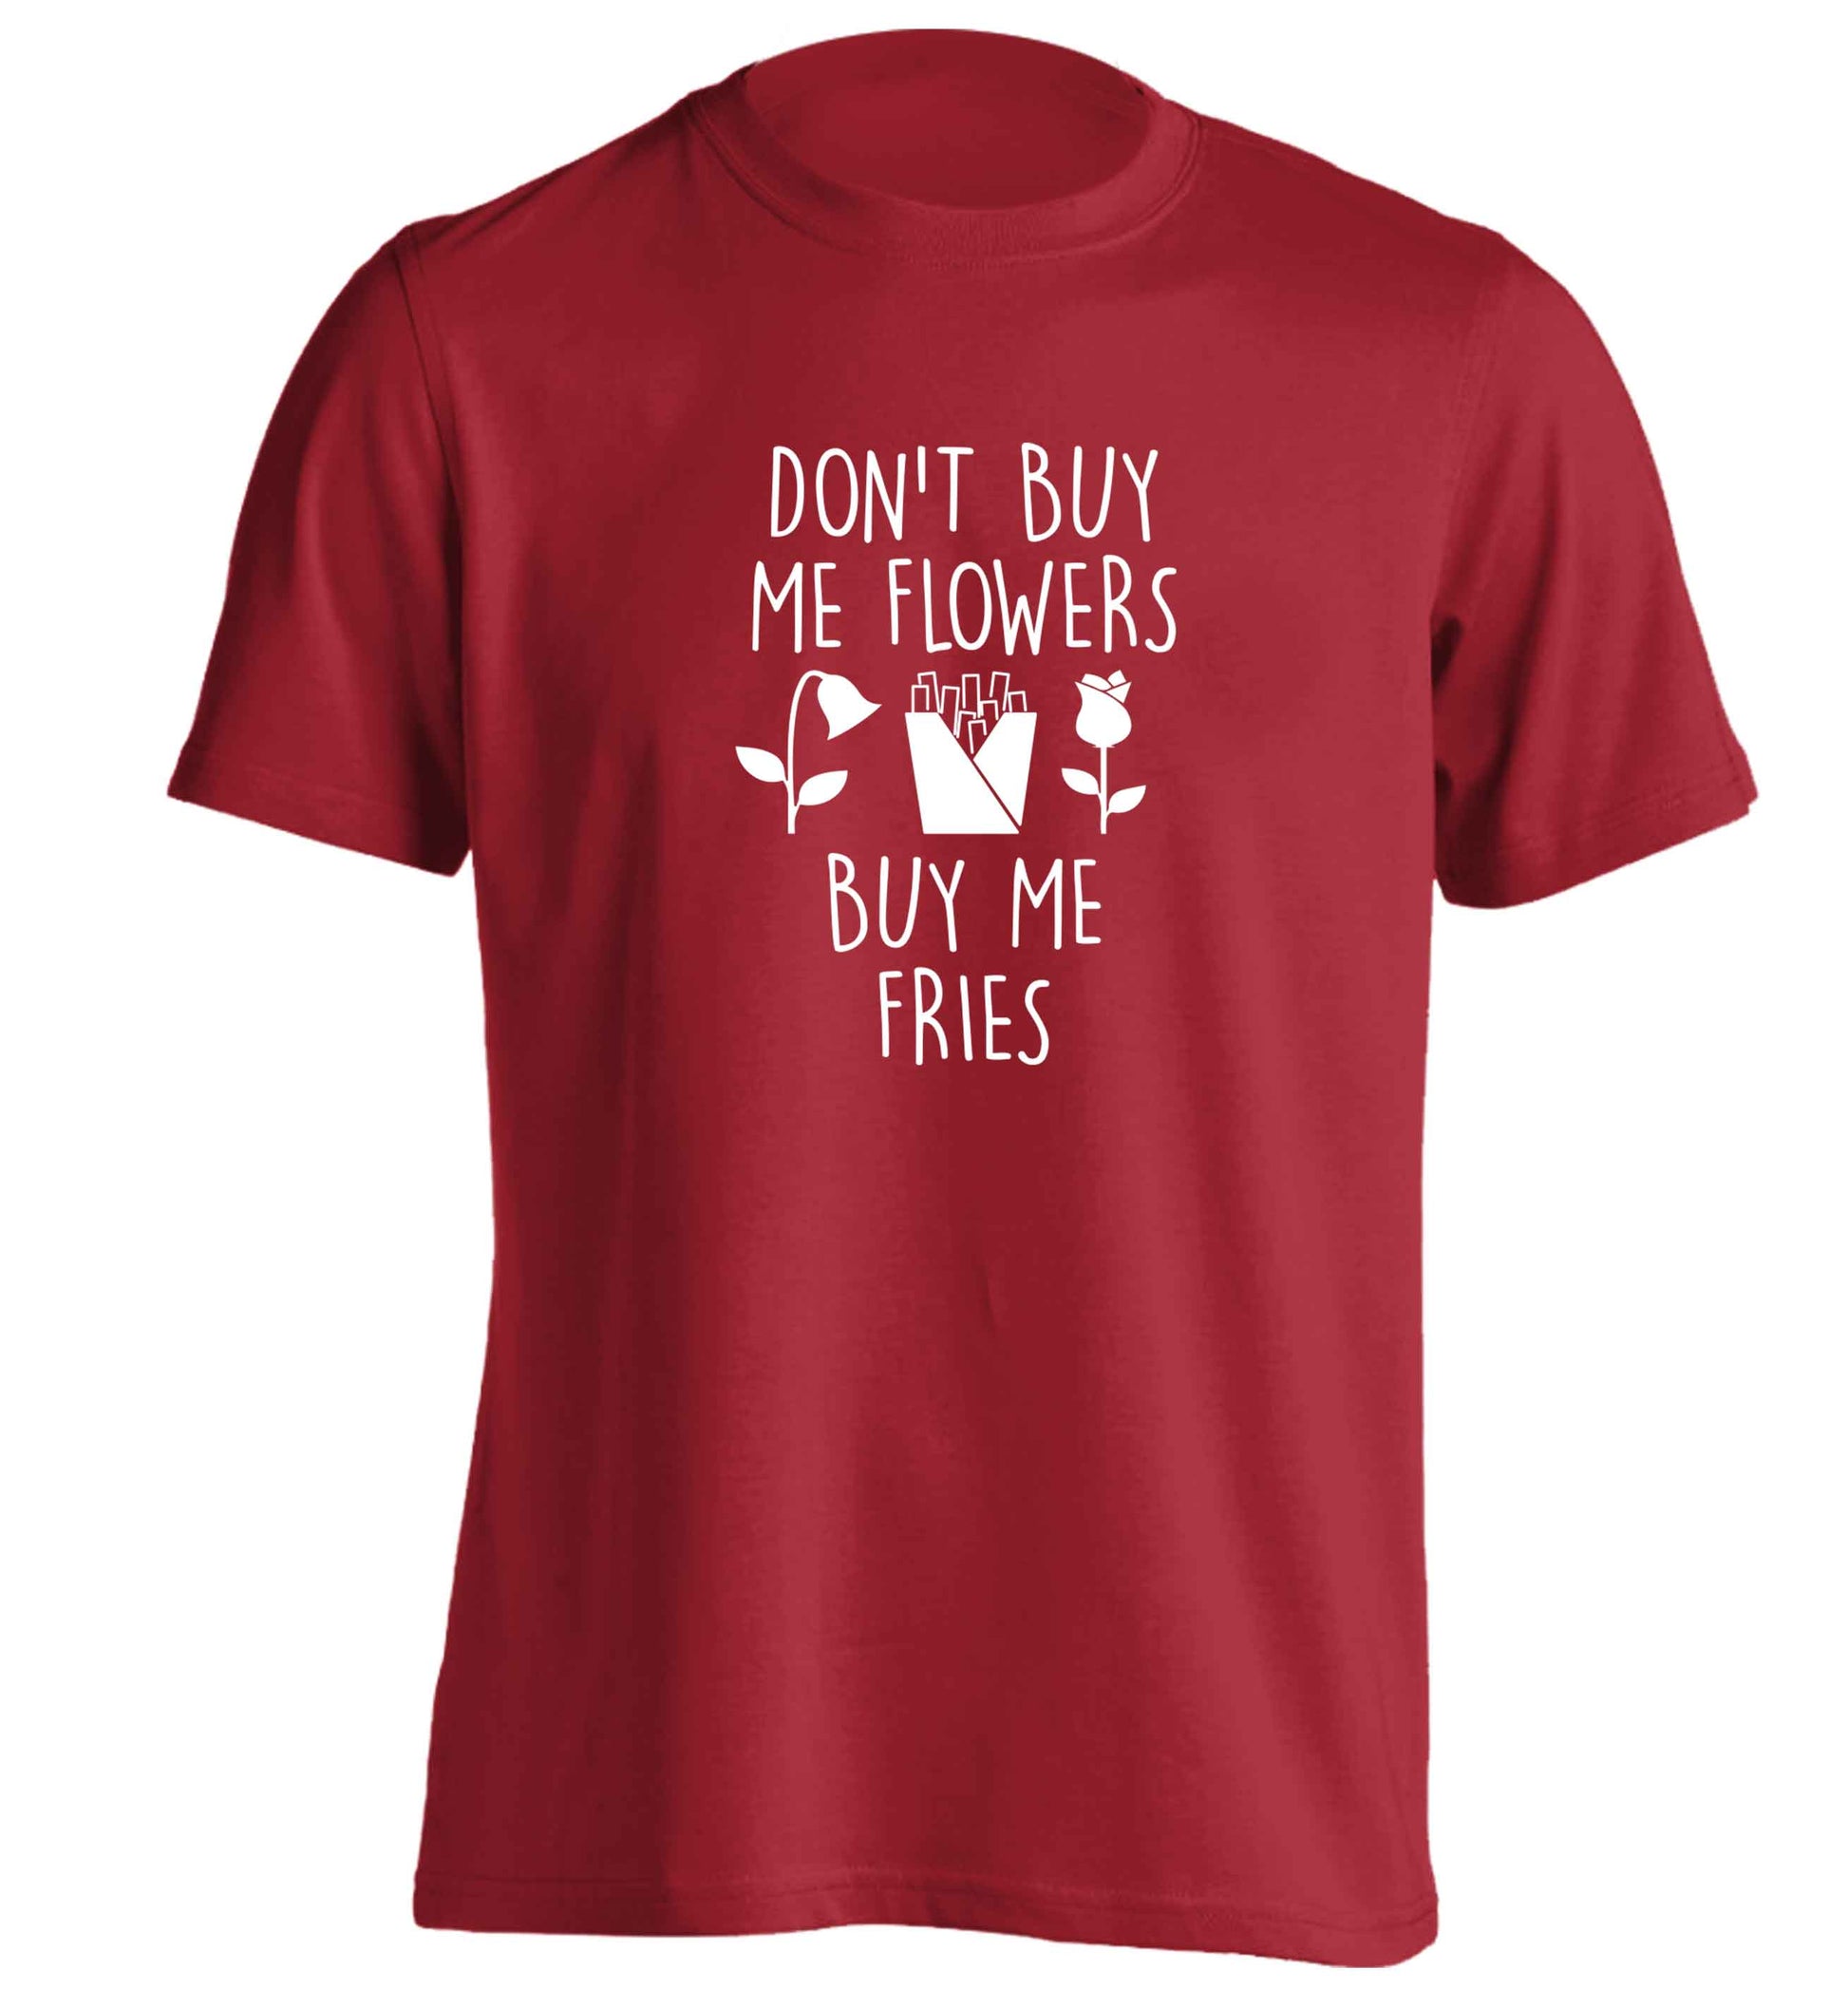 Don't buy me flowers buy me fries adults unisex red Tshirt 2XL